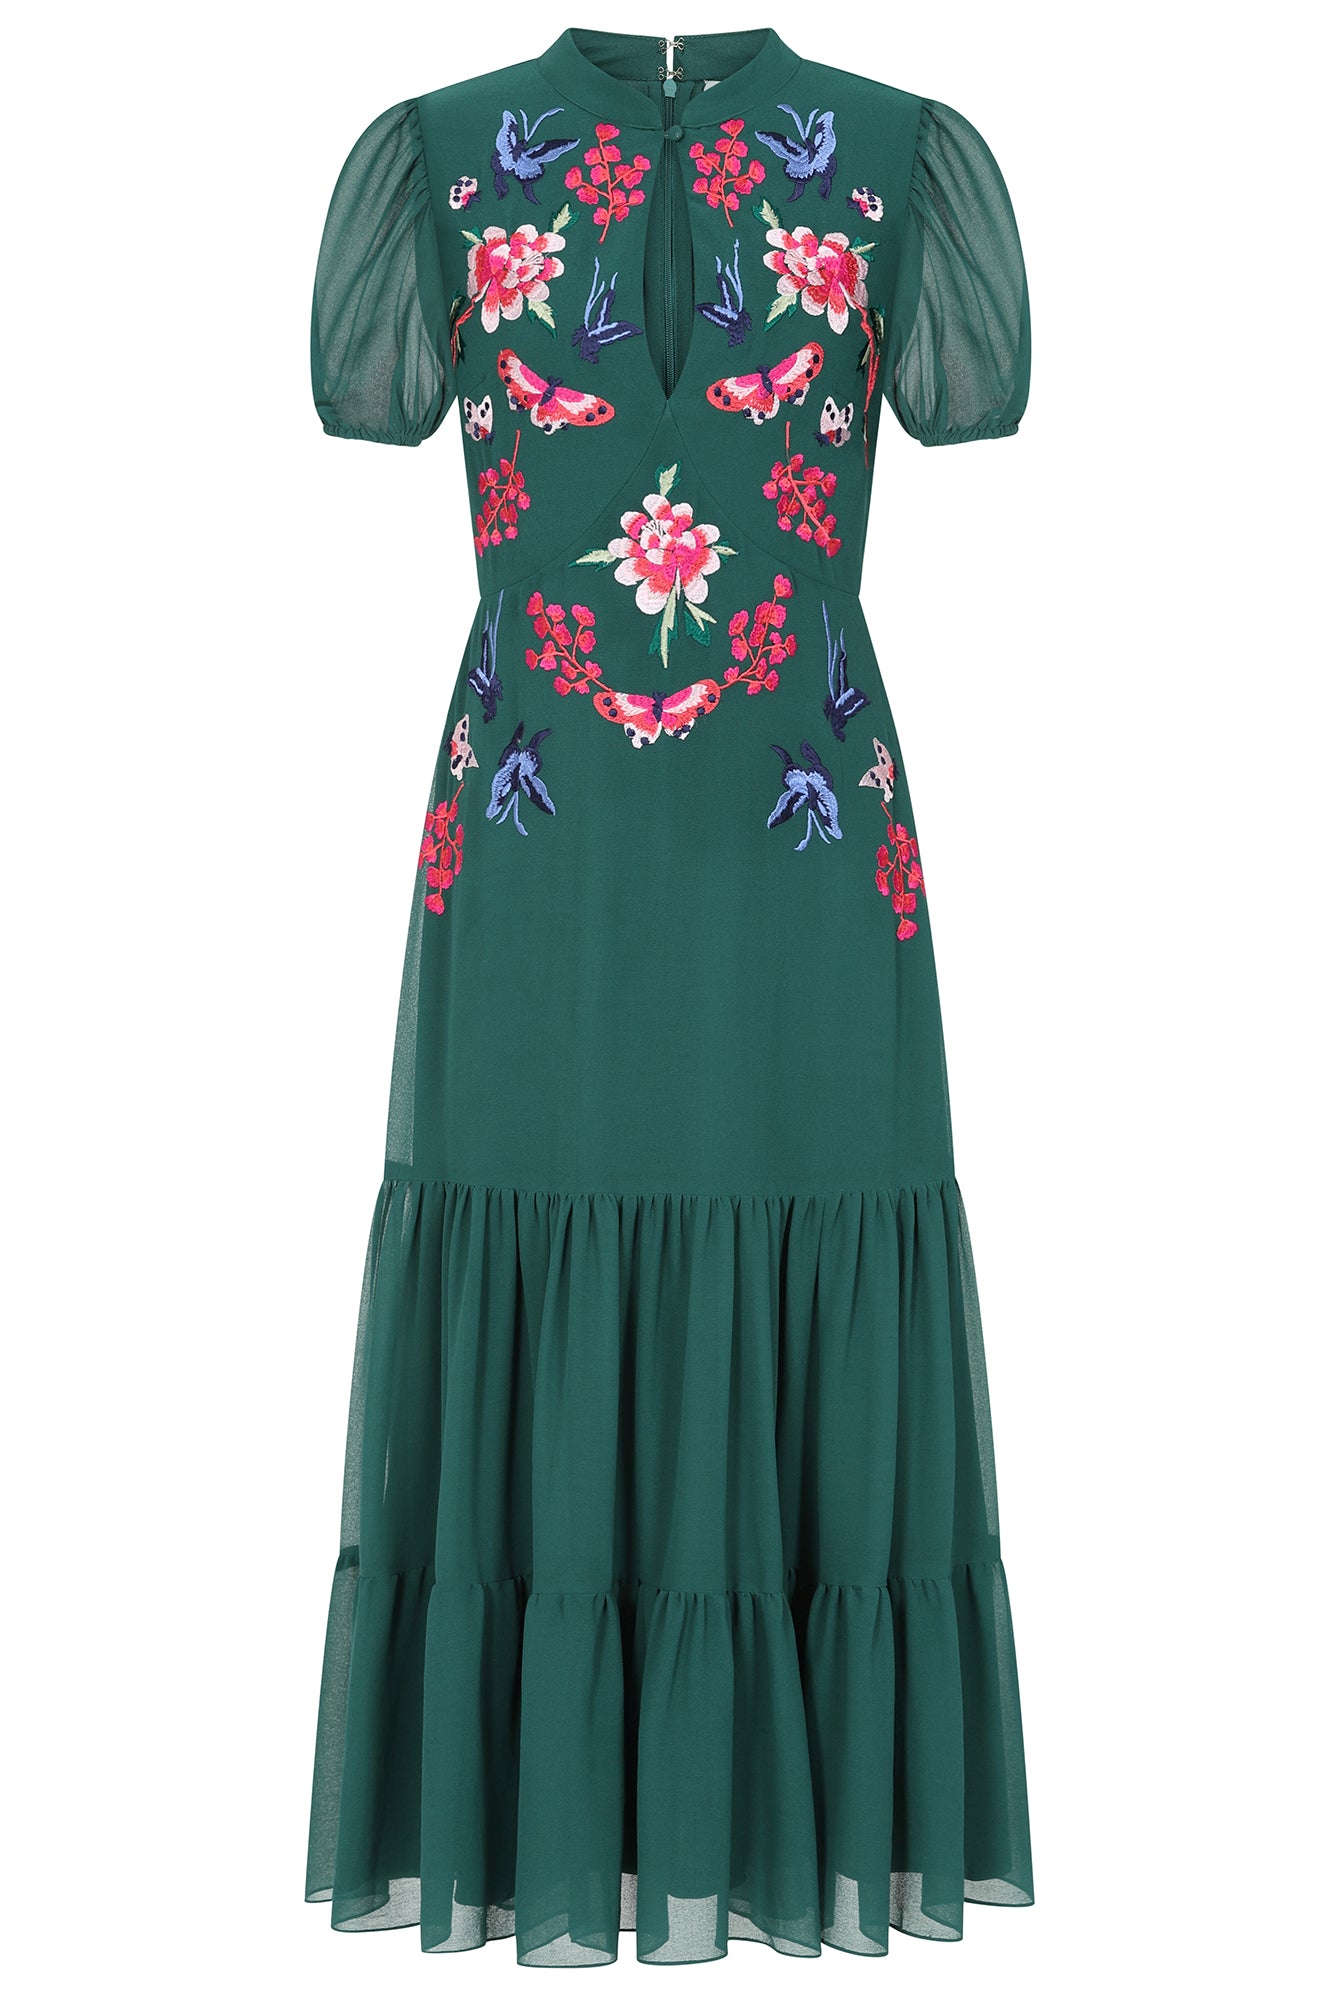 Women’s Marella Floral Embroidered Midi Dress - Alpine Green Extra Small Frock and Frill